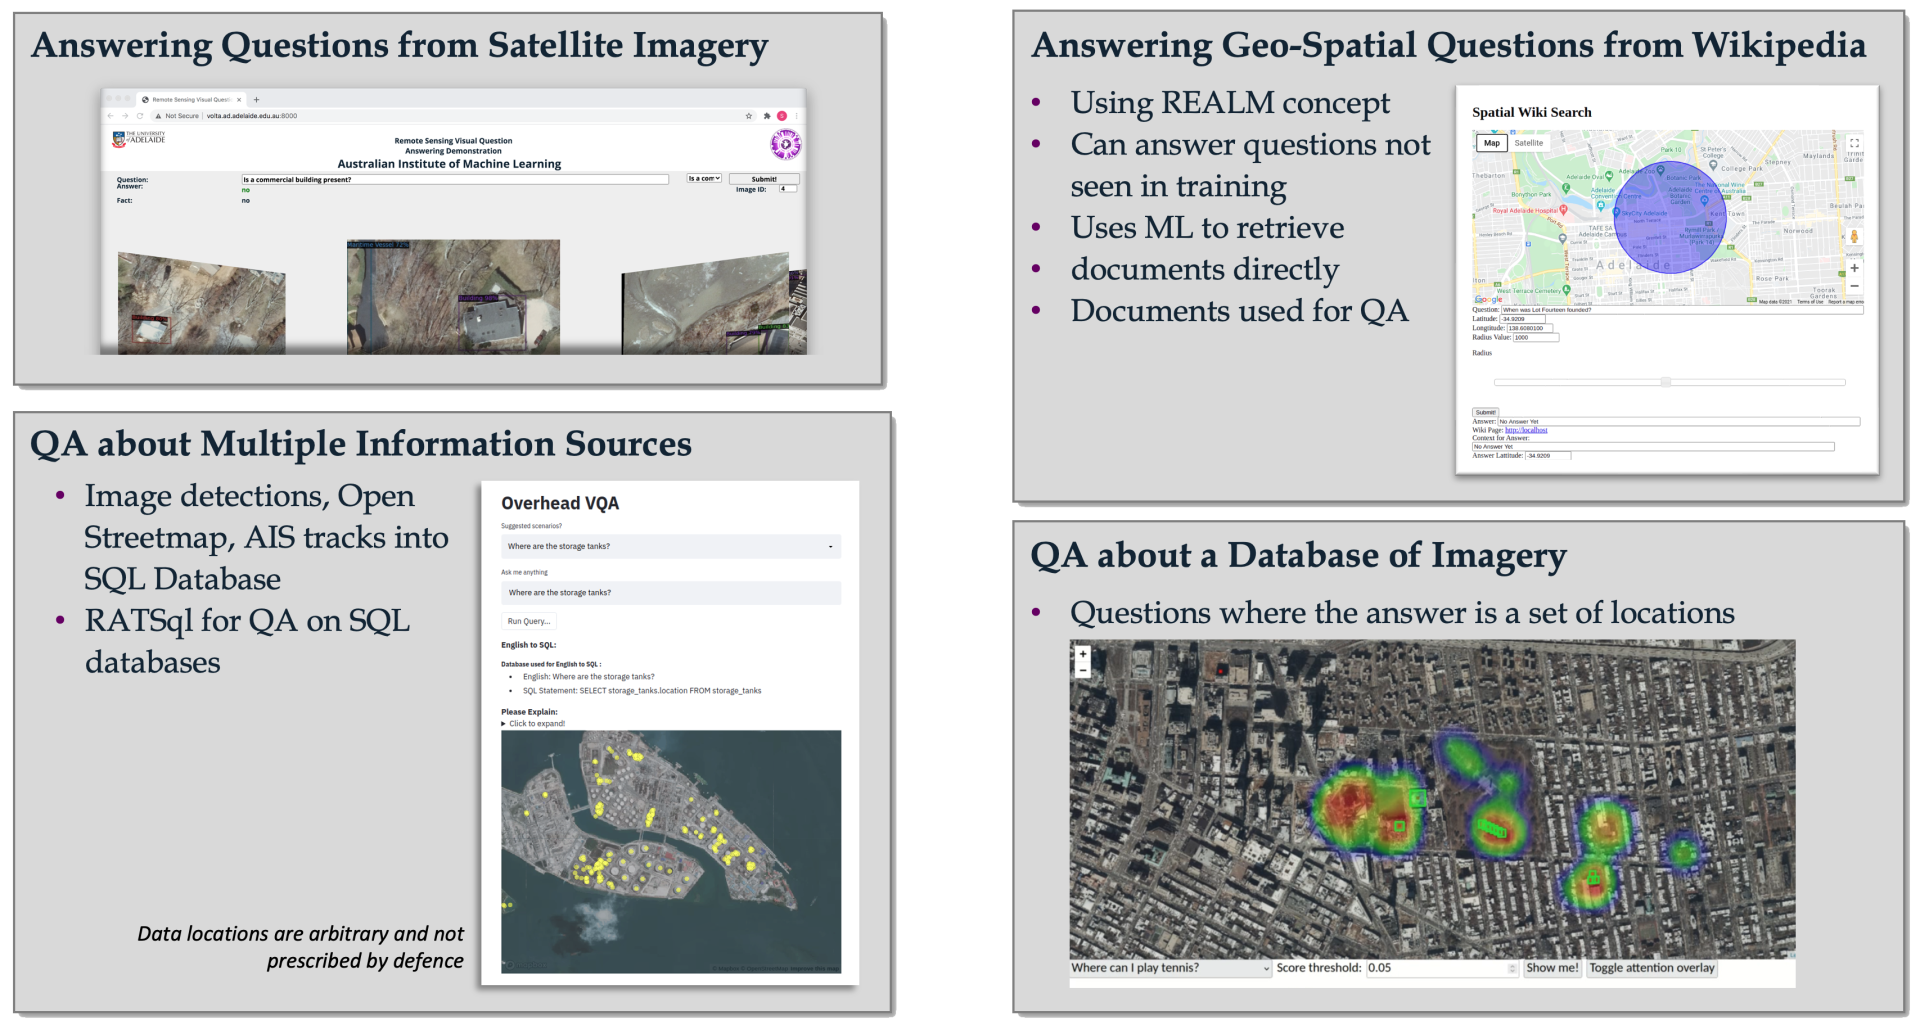 Four boxes containing screenshots of examples of: (1) answering questions from satellite imagery, (2) answering geo-spatial questions from Wikipidia, (3) QA about multiple information sources, and (4) QA about a database of imagery.